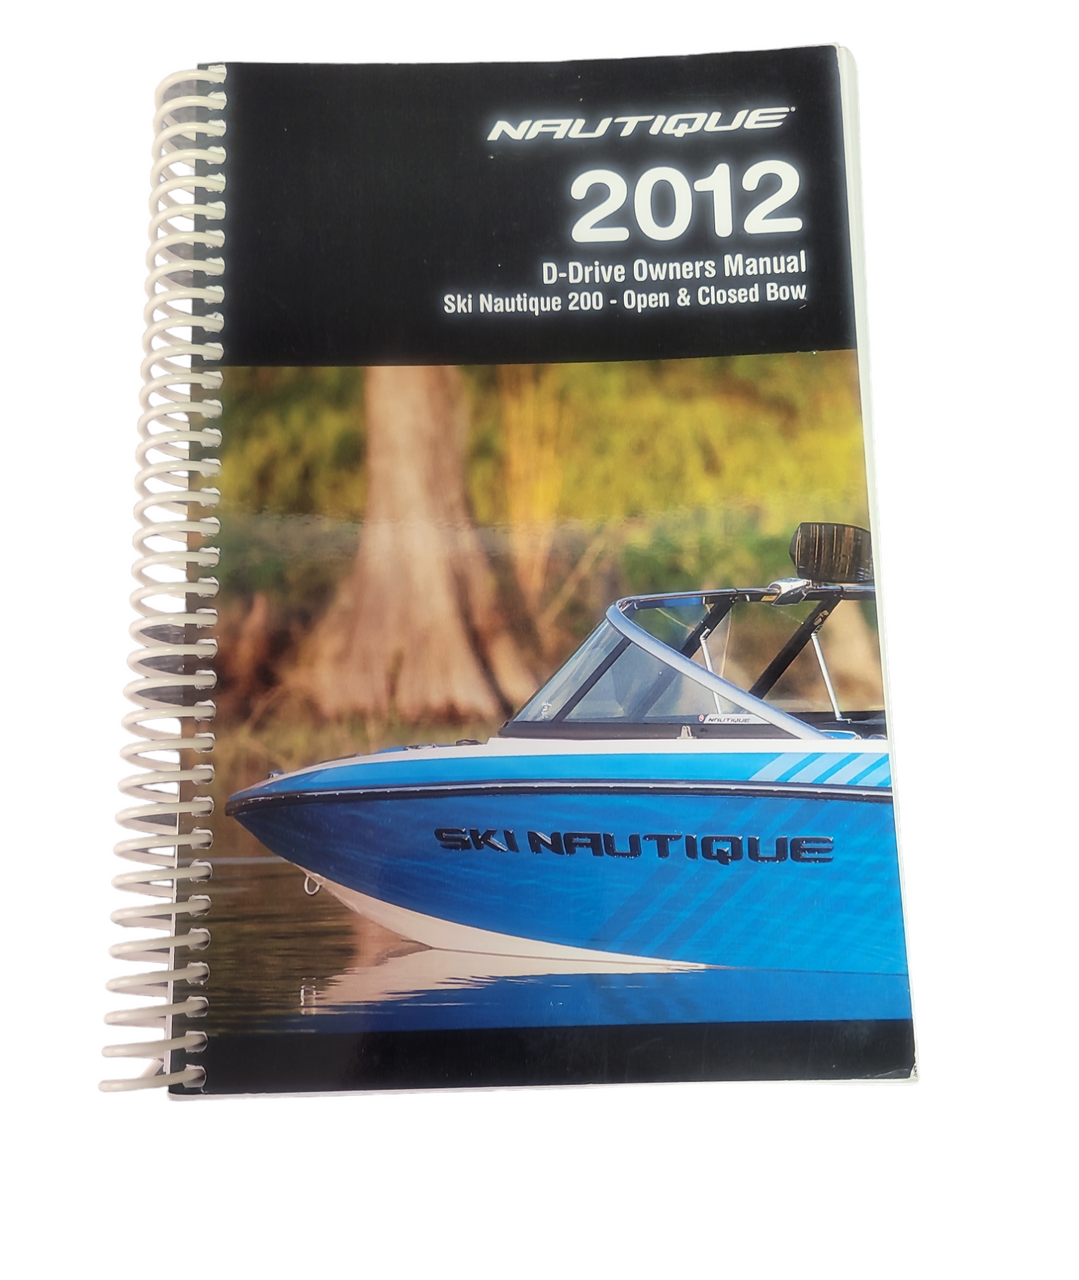 OWNERS MANUAL- 2012 D-DRIVE: SKI NAUTIQUE 200 OPEN & CLOSED BOW